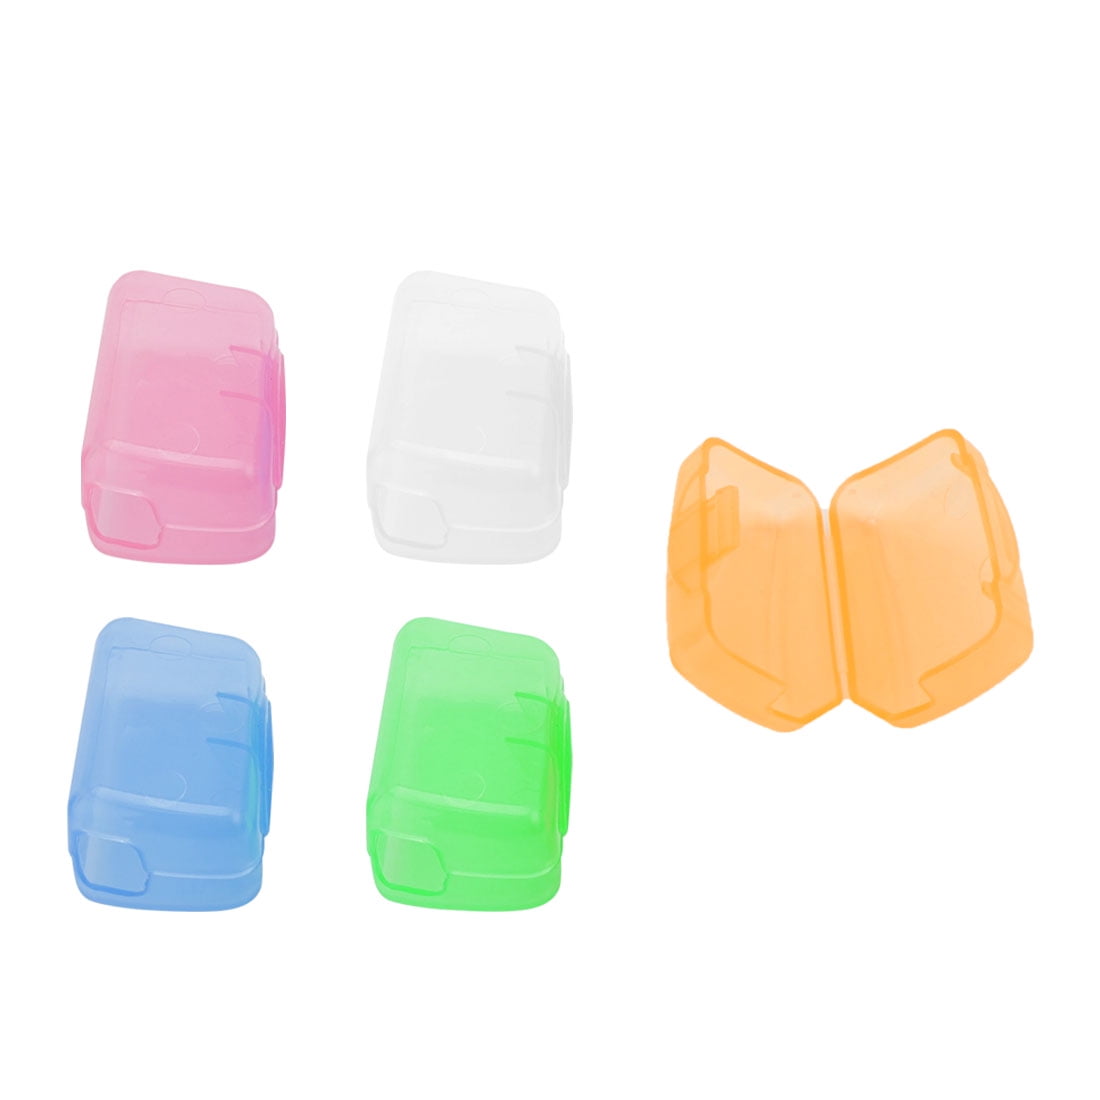 10PC Toothbrush Head Cover Holder Travel Camping Case Protect Brush Cap Case YMZ 